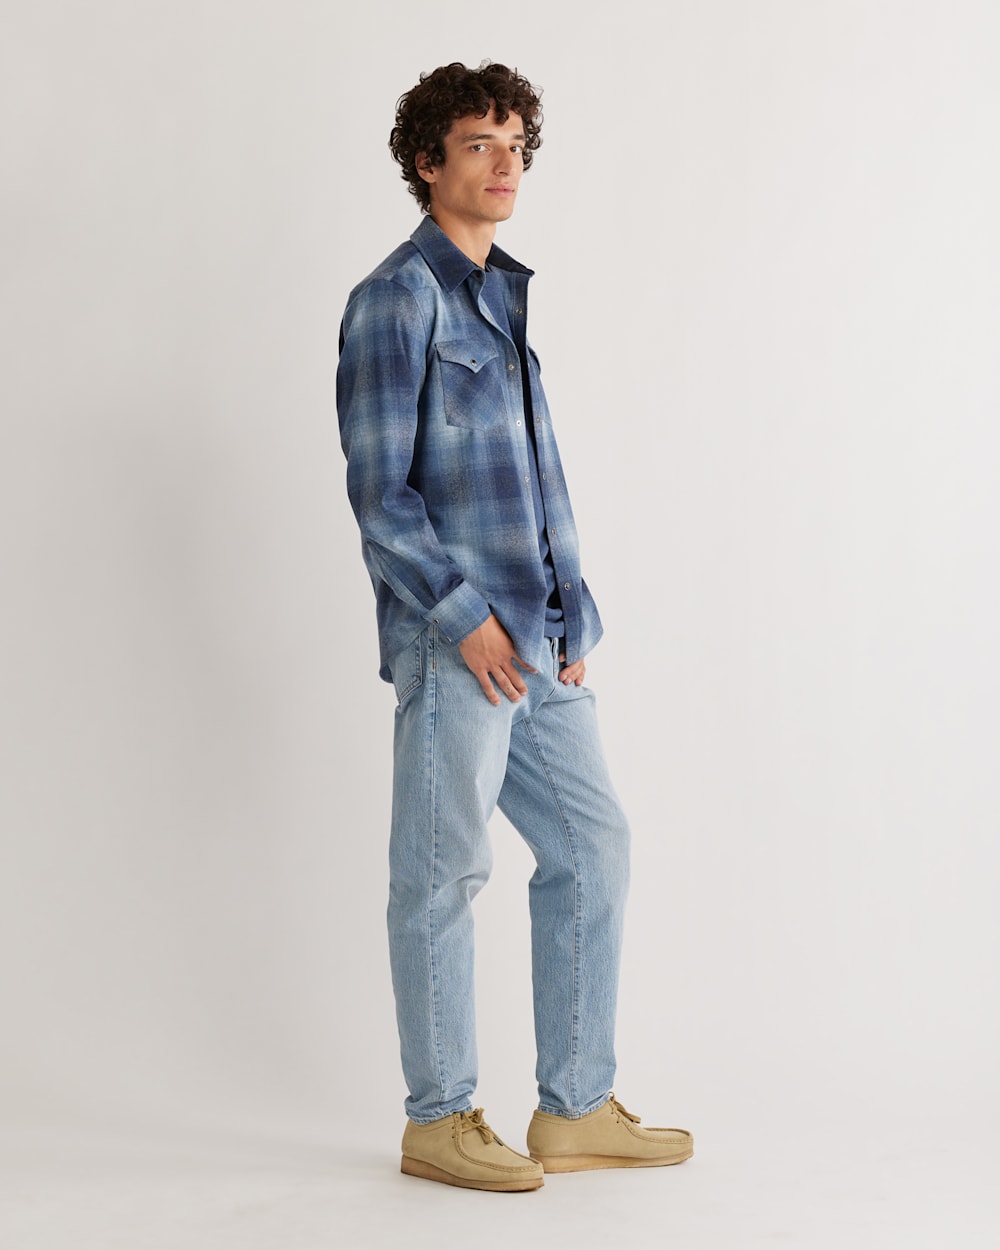 ALTERNATE VIEW OF MEN'S PLAID SNAP-FRONT WESTERN CANYON SHIRT IN NAVY MIX OMBRE image number 2